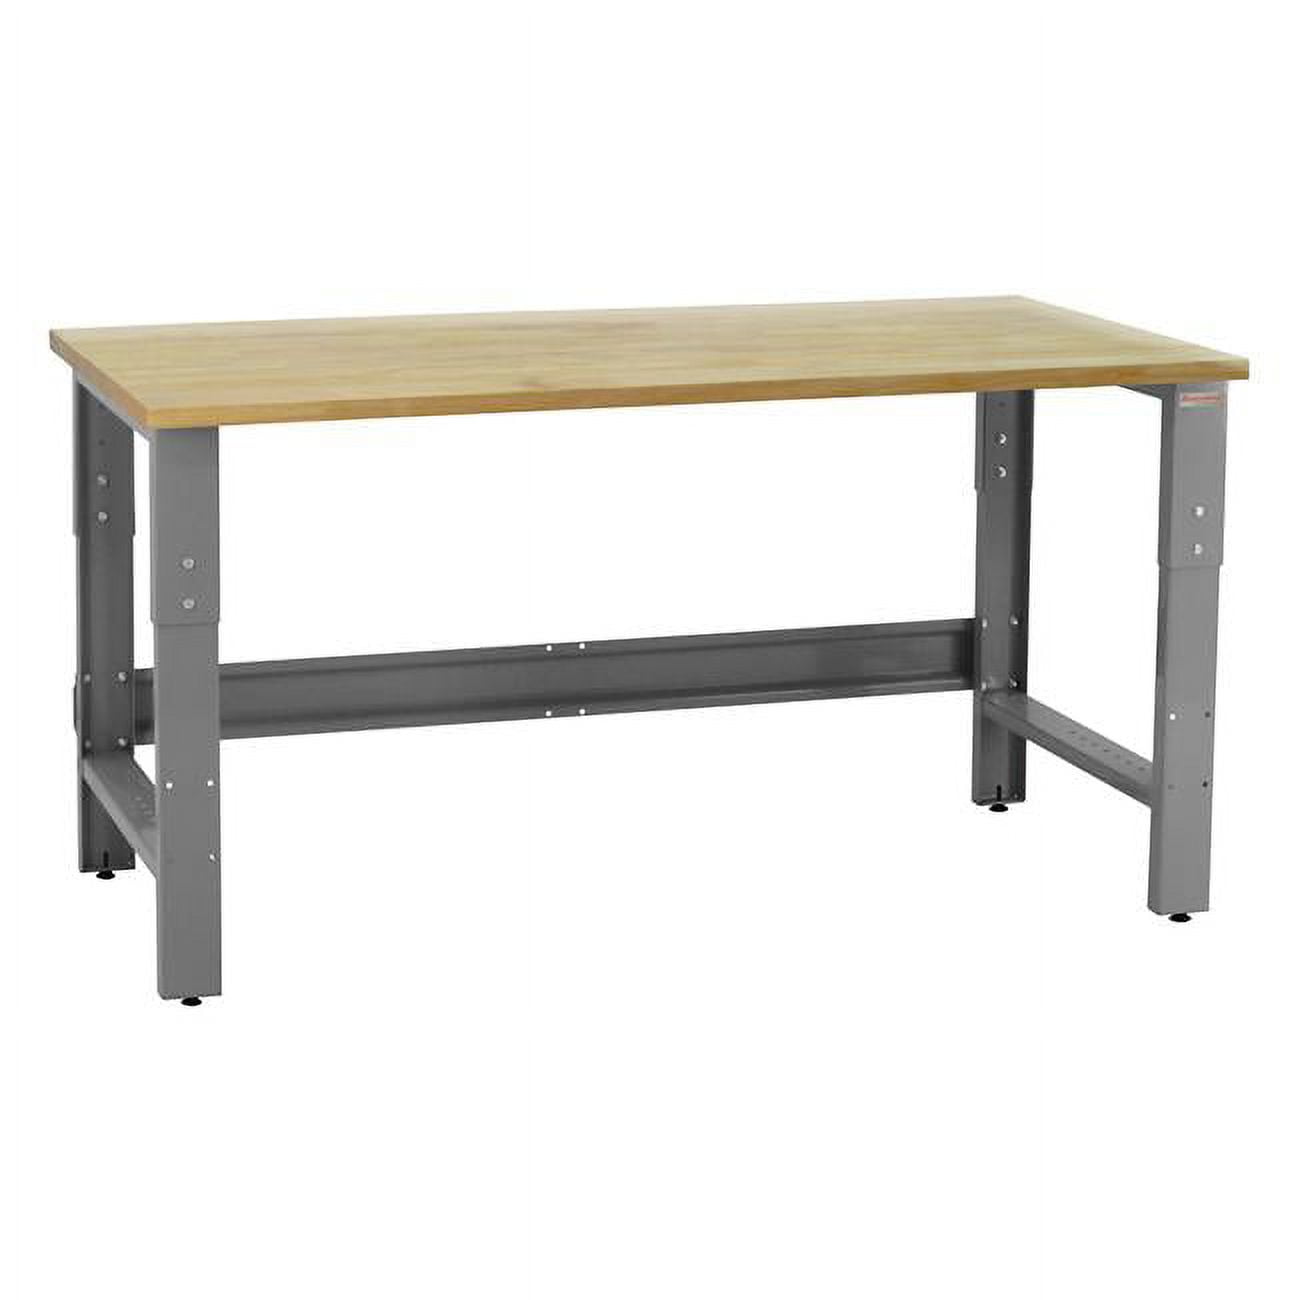 RWL3672-GFr 36 x 72 x 30 to 36 in. Adjustable Height Roosevelt Workbenches with 1.75 in. Thick Solid Maple Lacquered Butcher Block Top, Gray -  BenchPro